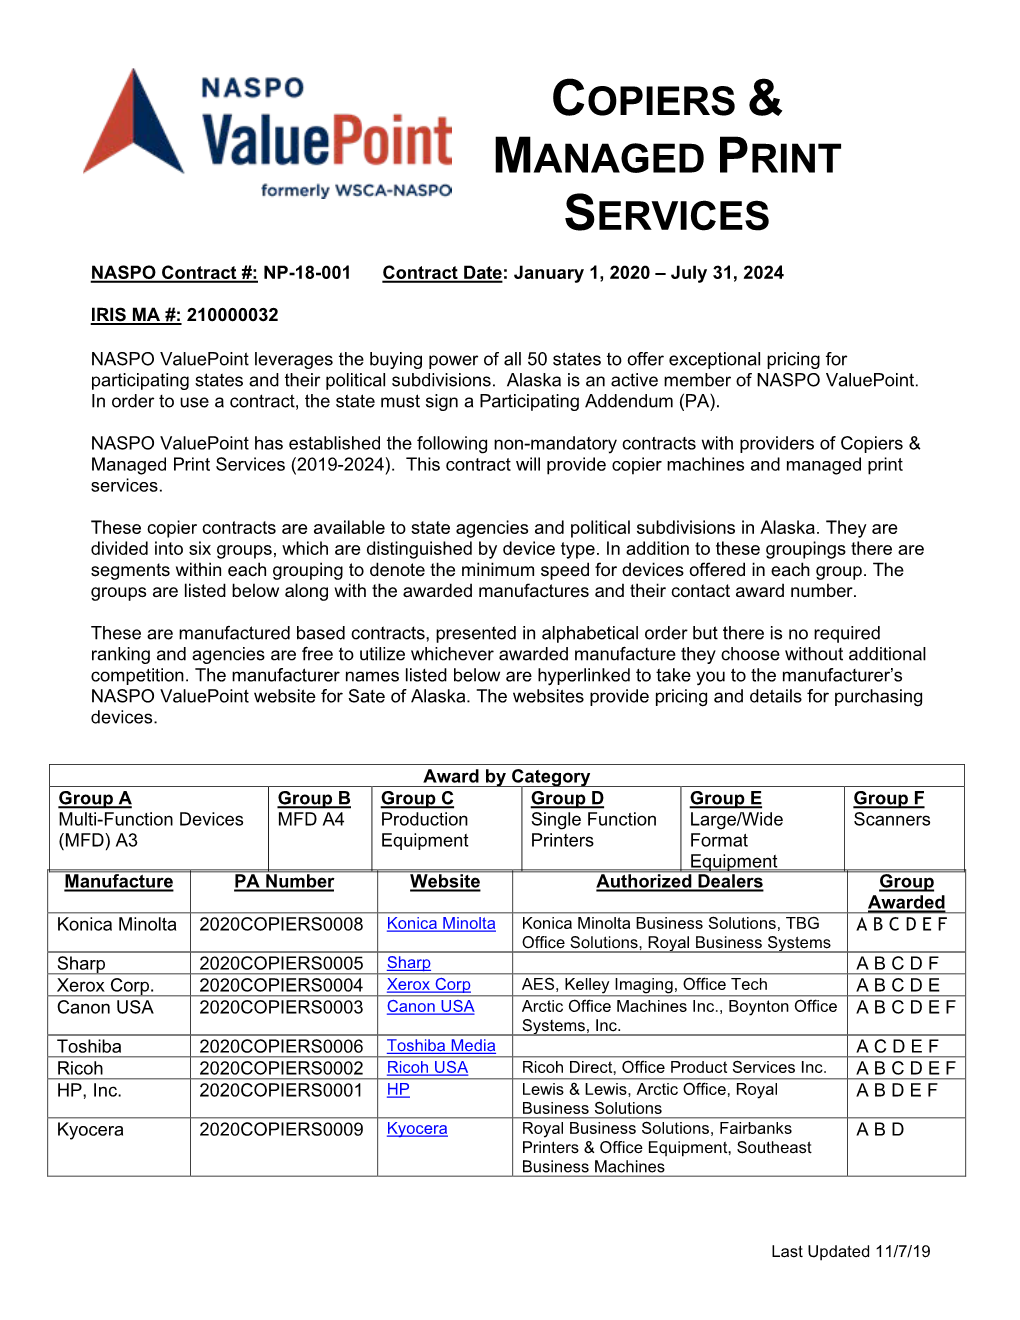 Copiers & Managed Print Services